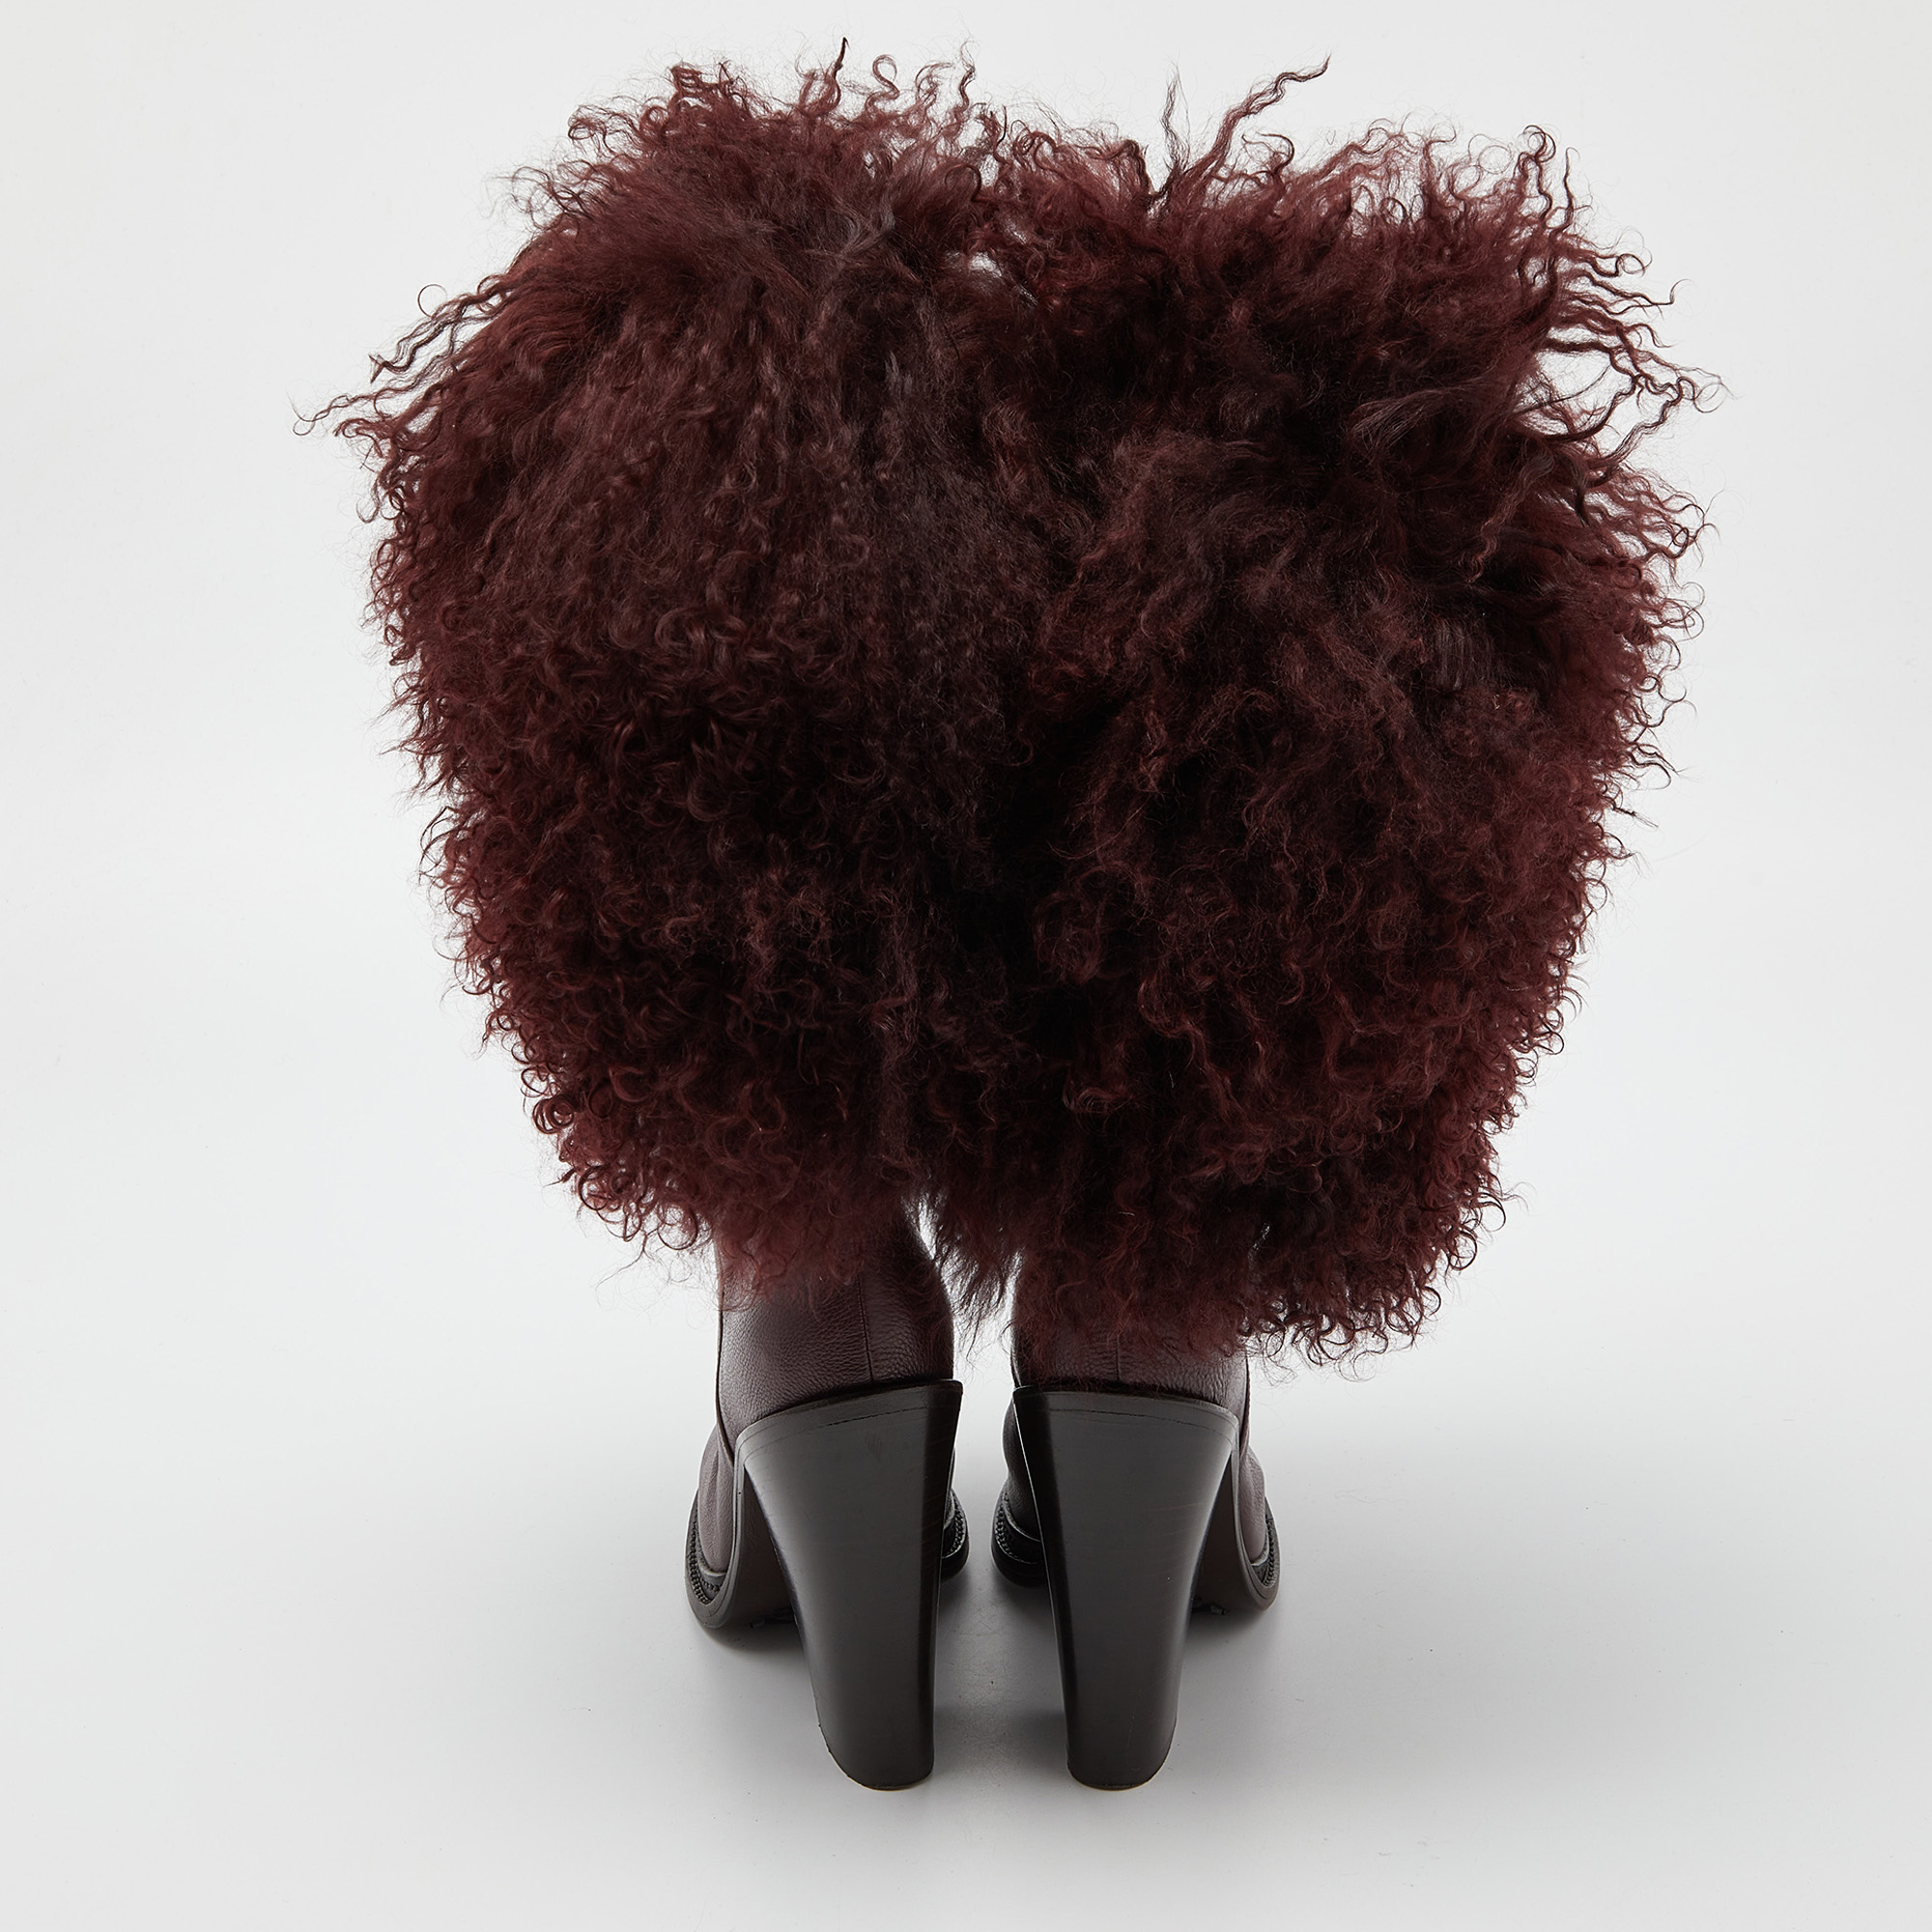 Dolce & Gabbana Burgundy Fur And Leather Calf Length Boots Size 38